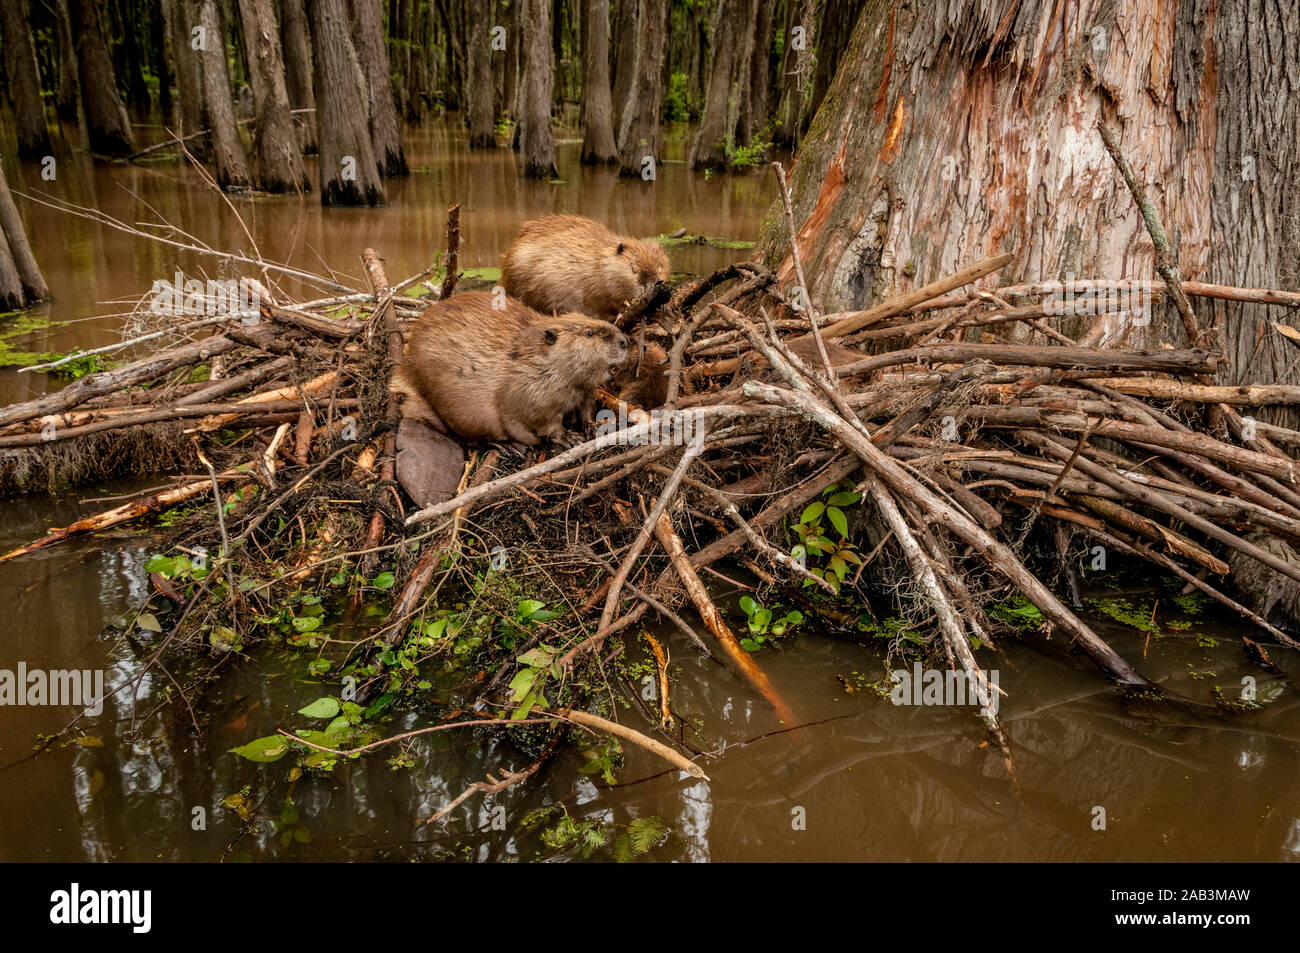 North American Beaver (Castor canadensis) male (front) and female (rear) on their lodge in Caddo Lake, near the town of Uncertain, Texas, USA. Stock Photo